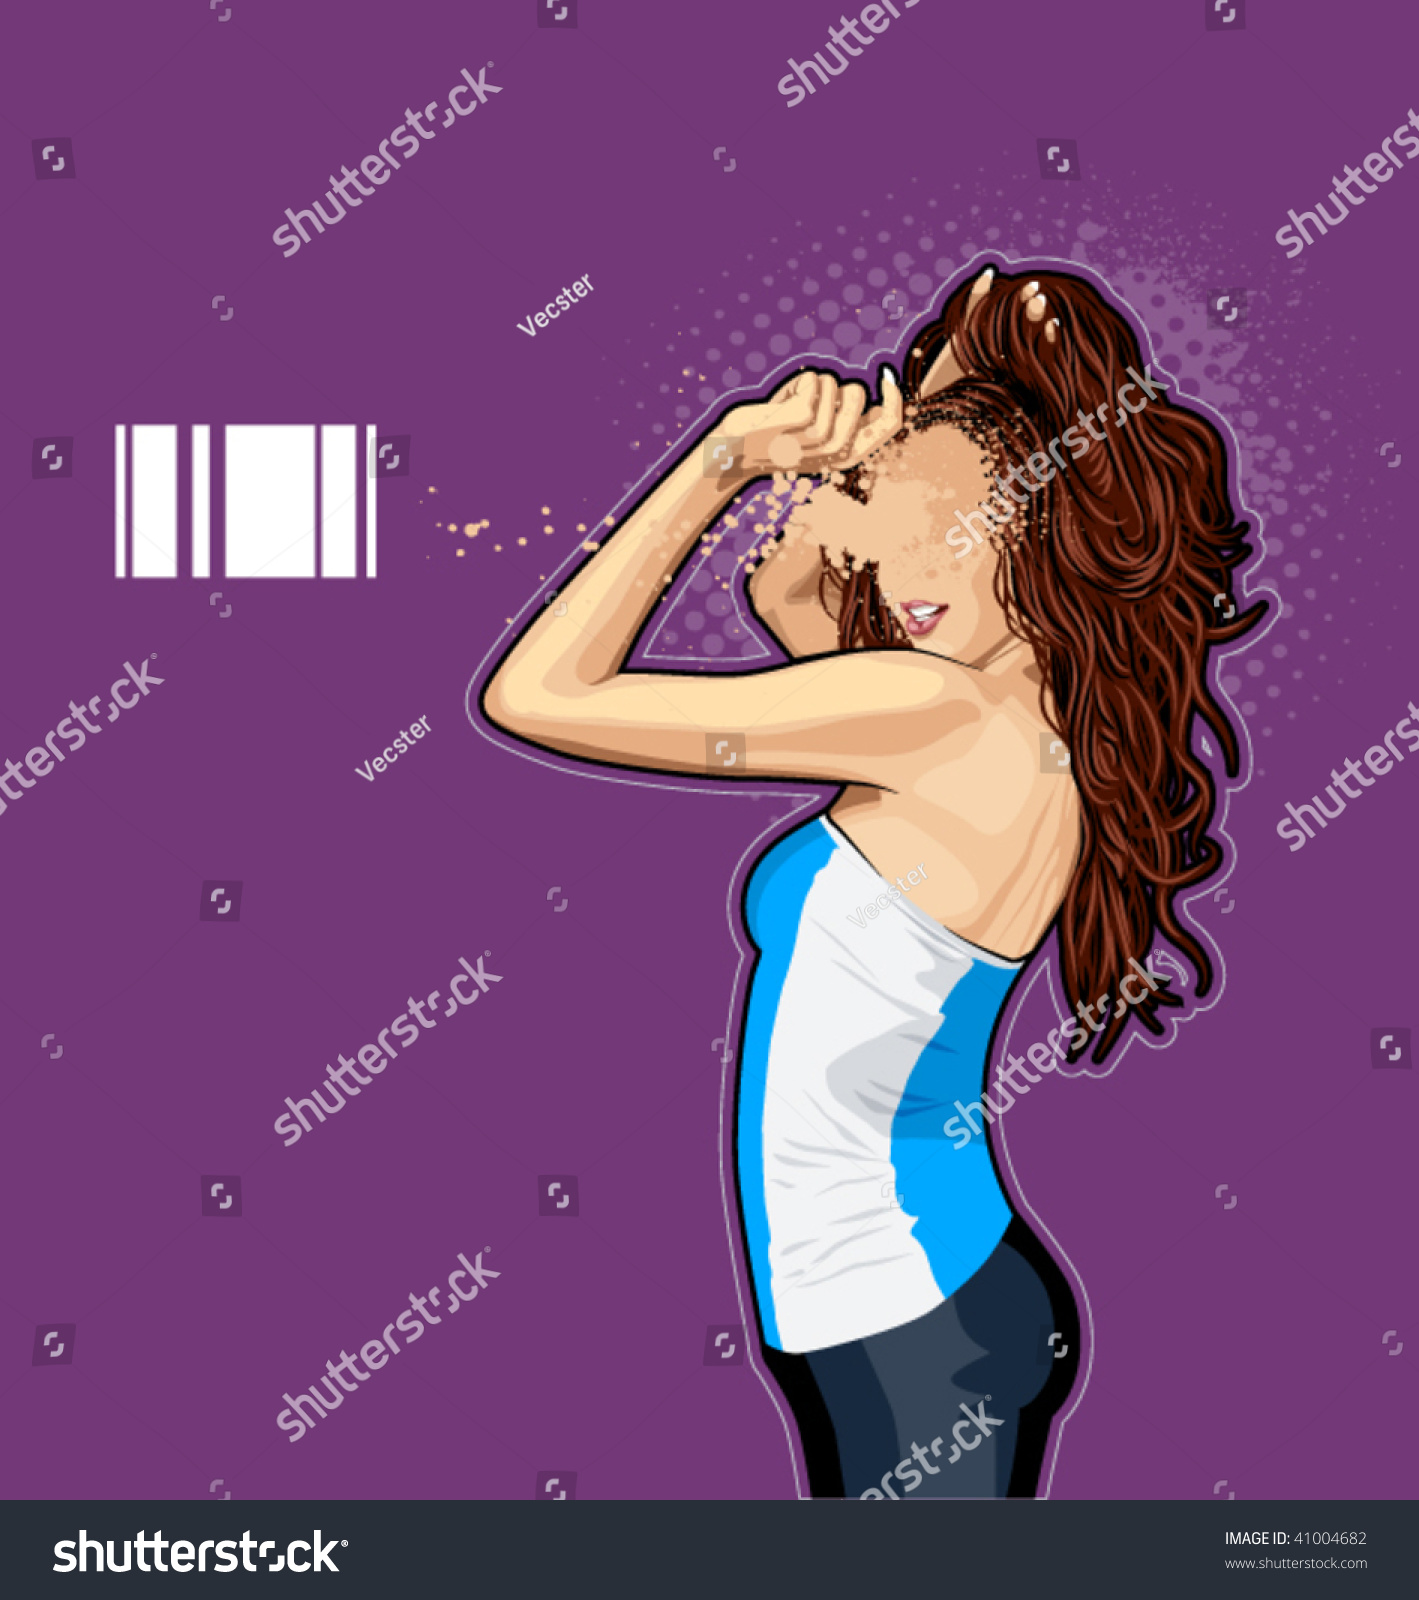 Abstract Sexy Girl Vector Illustration Stock Vector Royalty Free 41004682 Shutterstock 6165